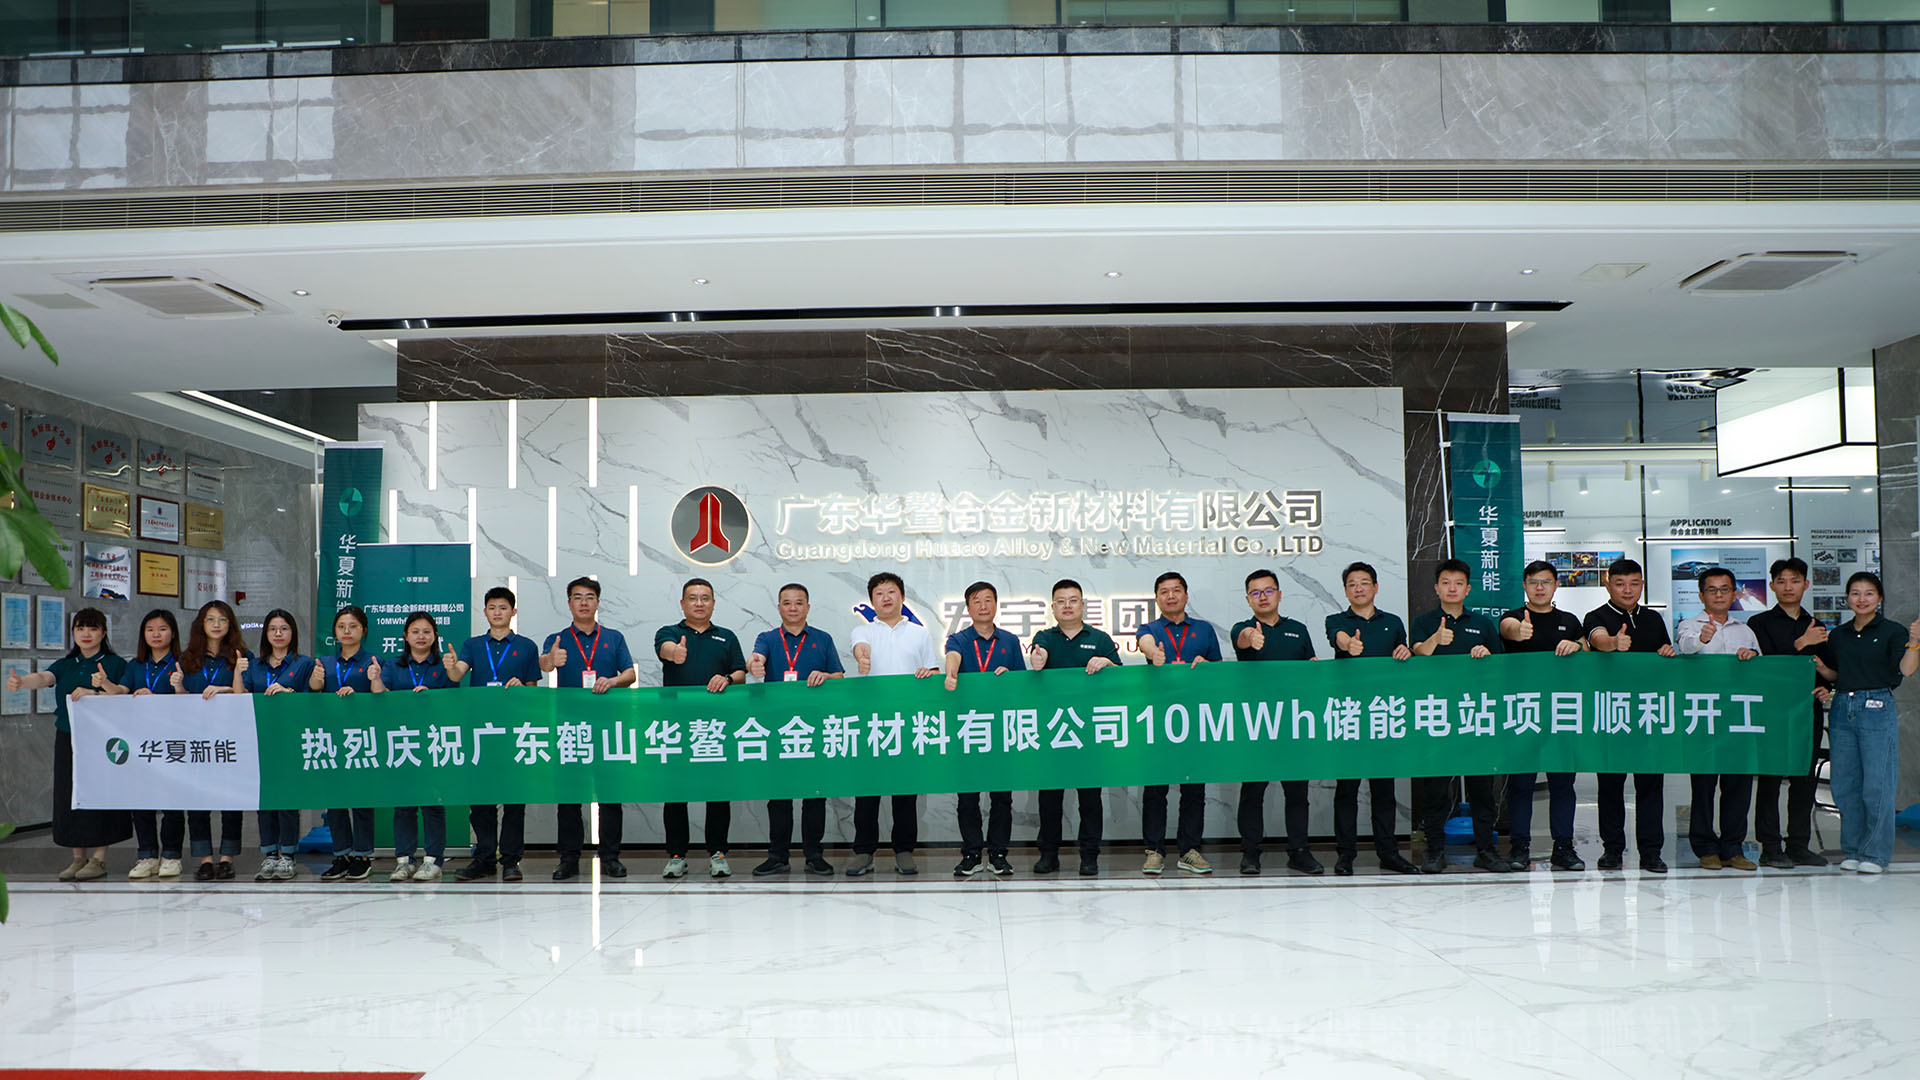 Guangdong 10MWh energy storage power station project